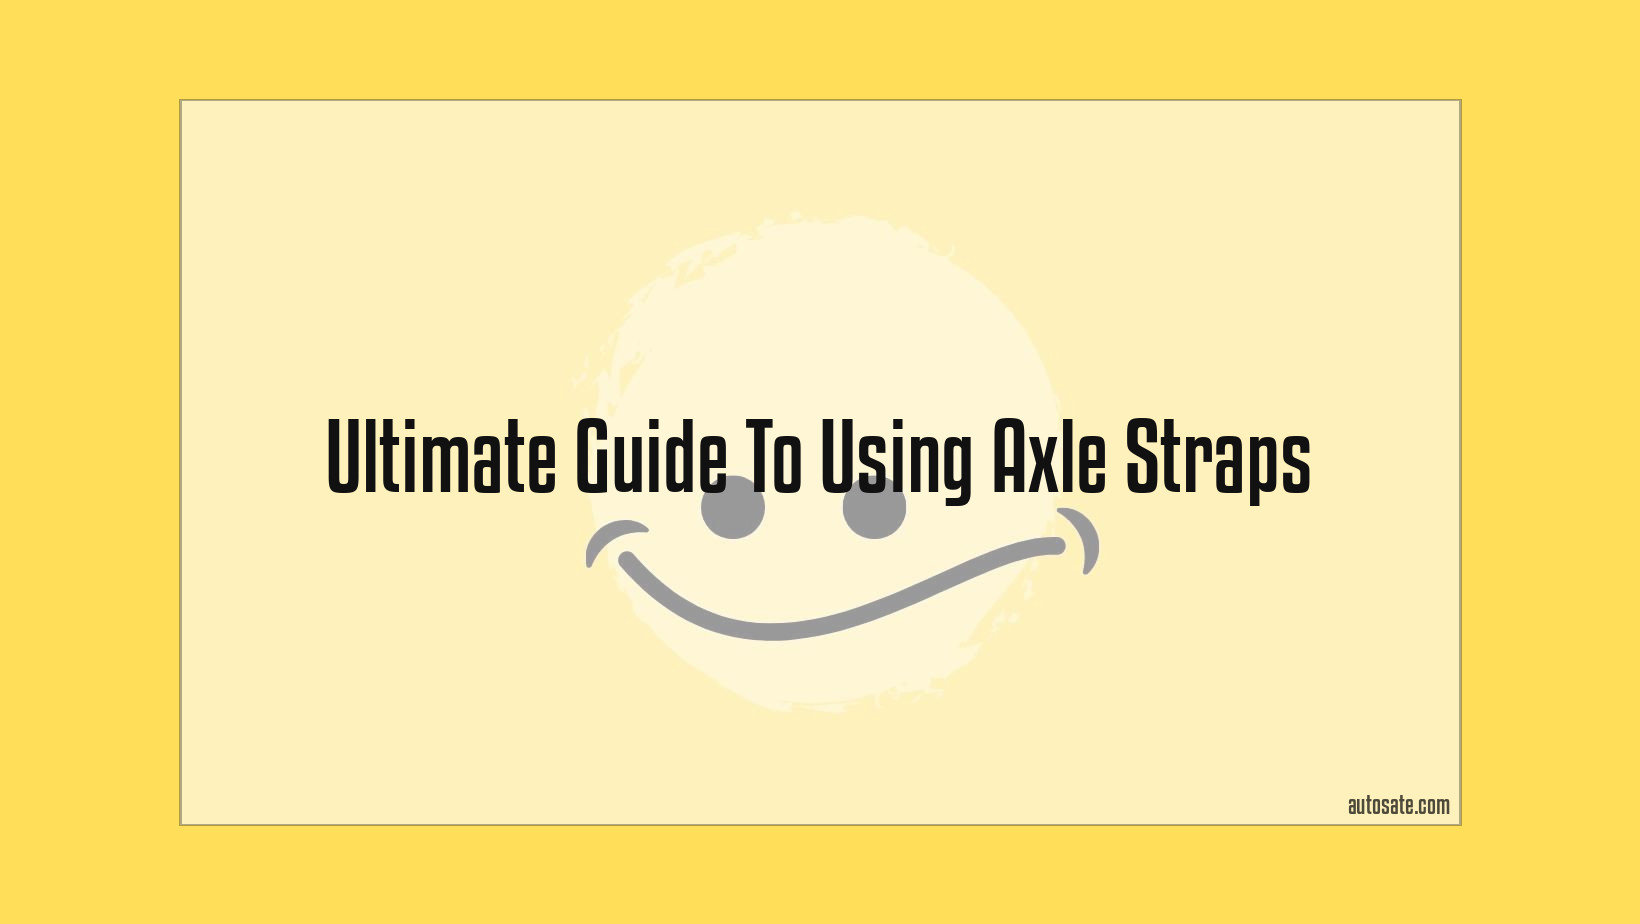 Ultimate Guide To Using Axle Straps